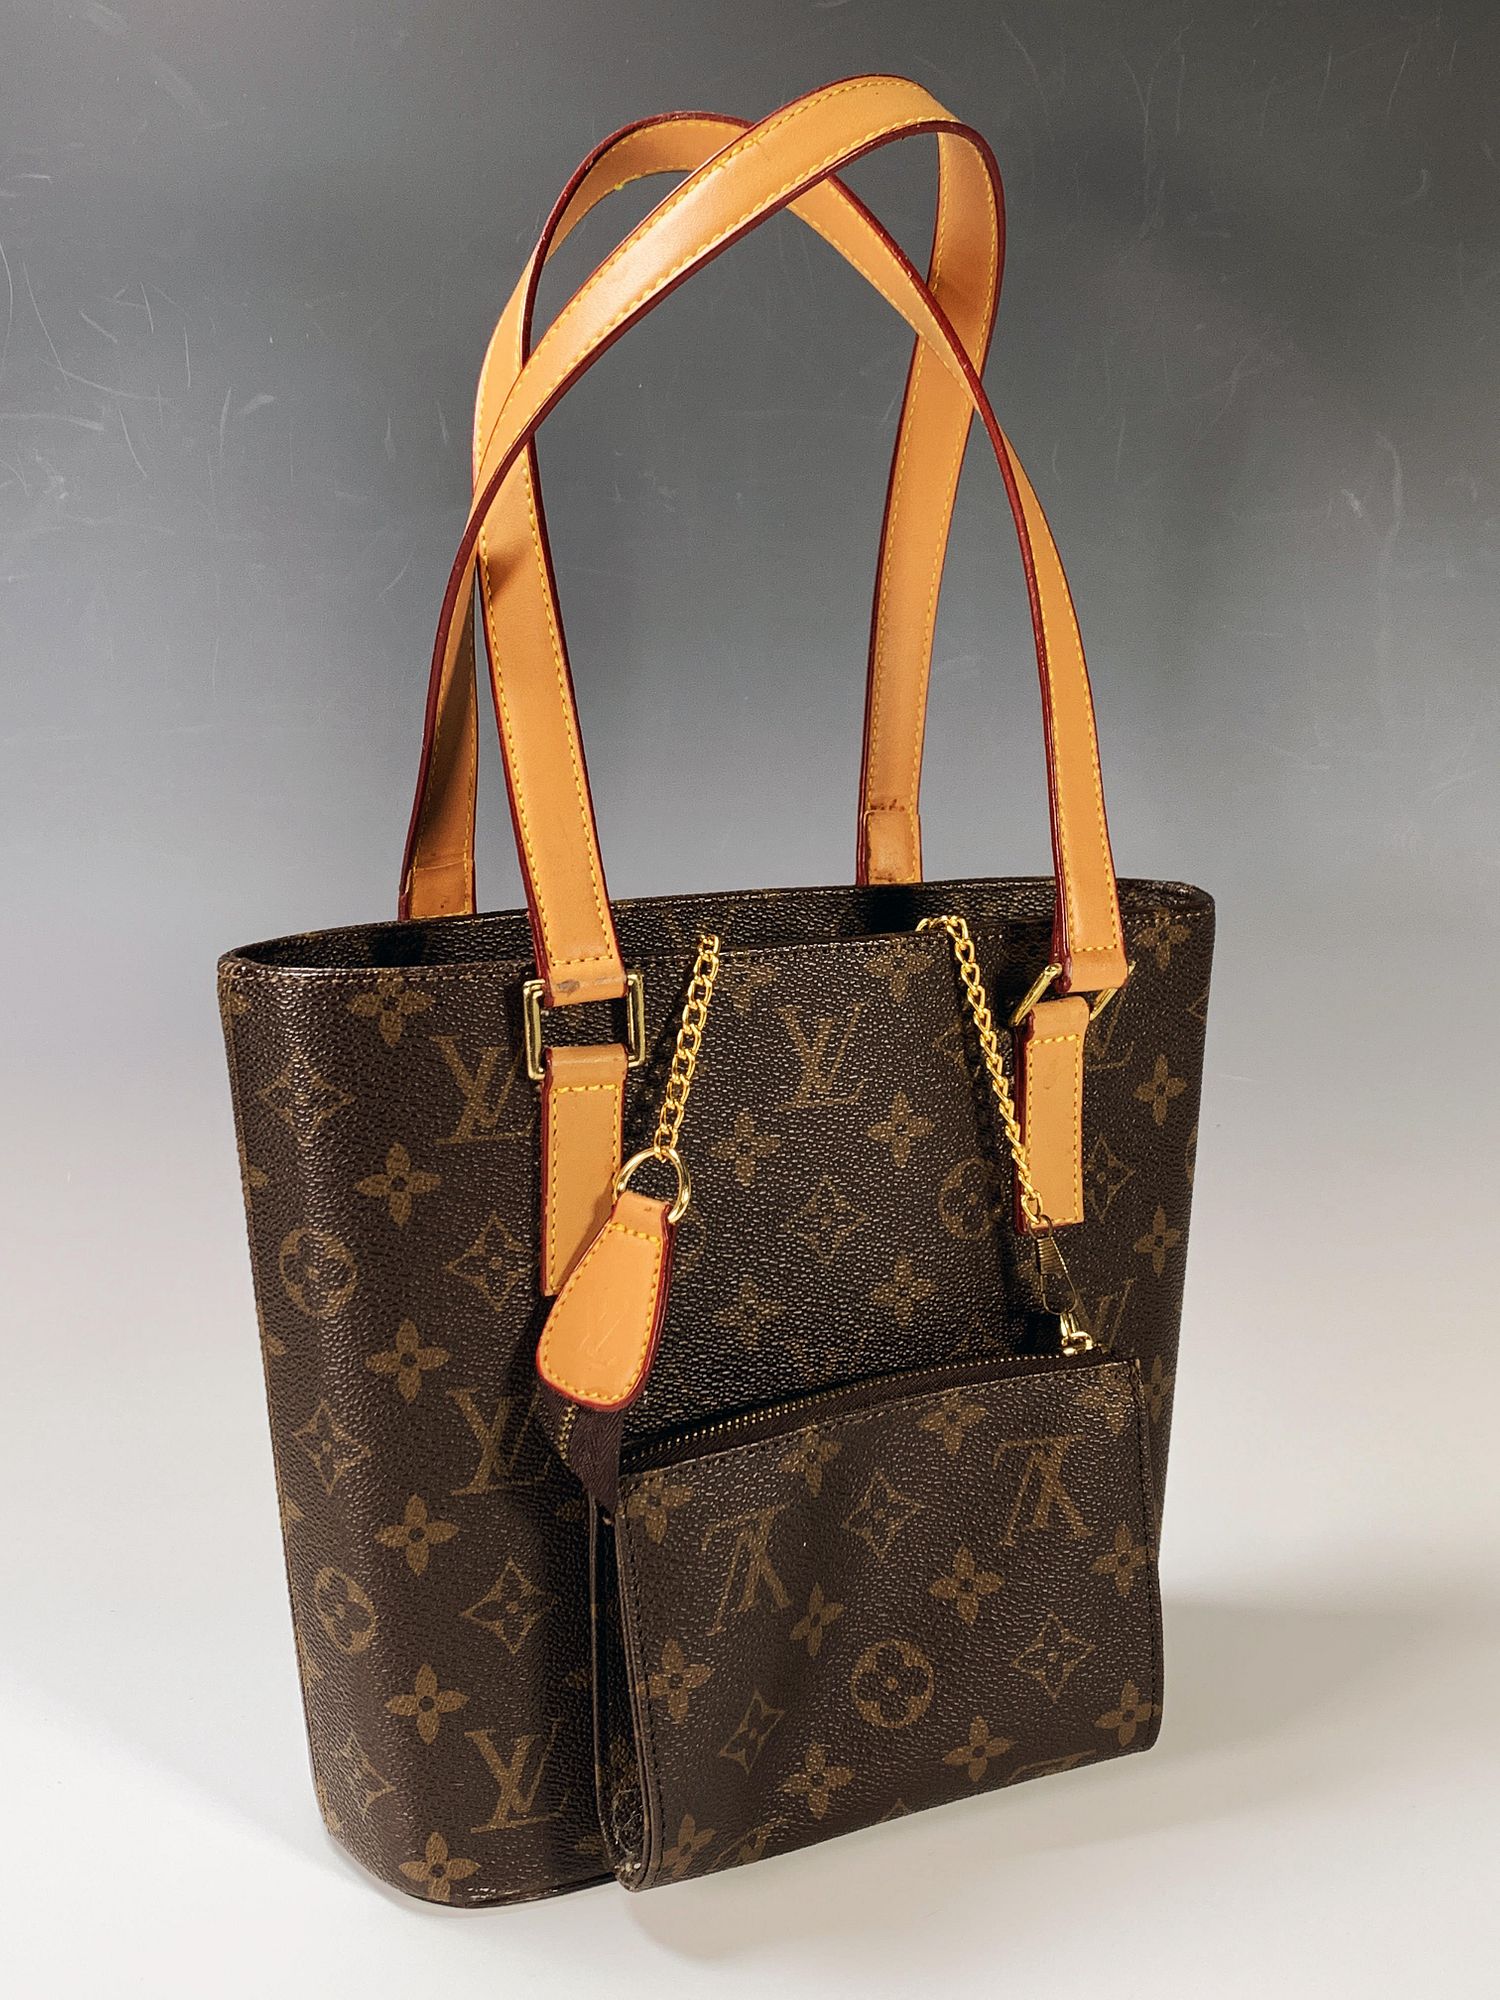 LOUIS VUITTON STYLE HANDBAG AND MATCHING COIN PURSE for sale at auction on  27th October